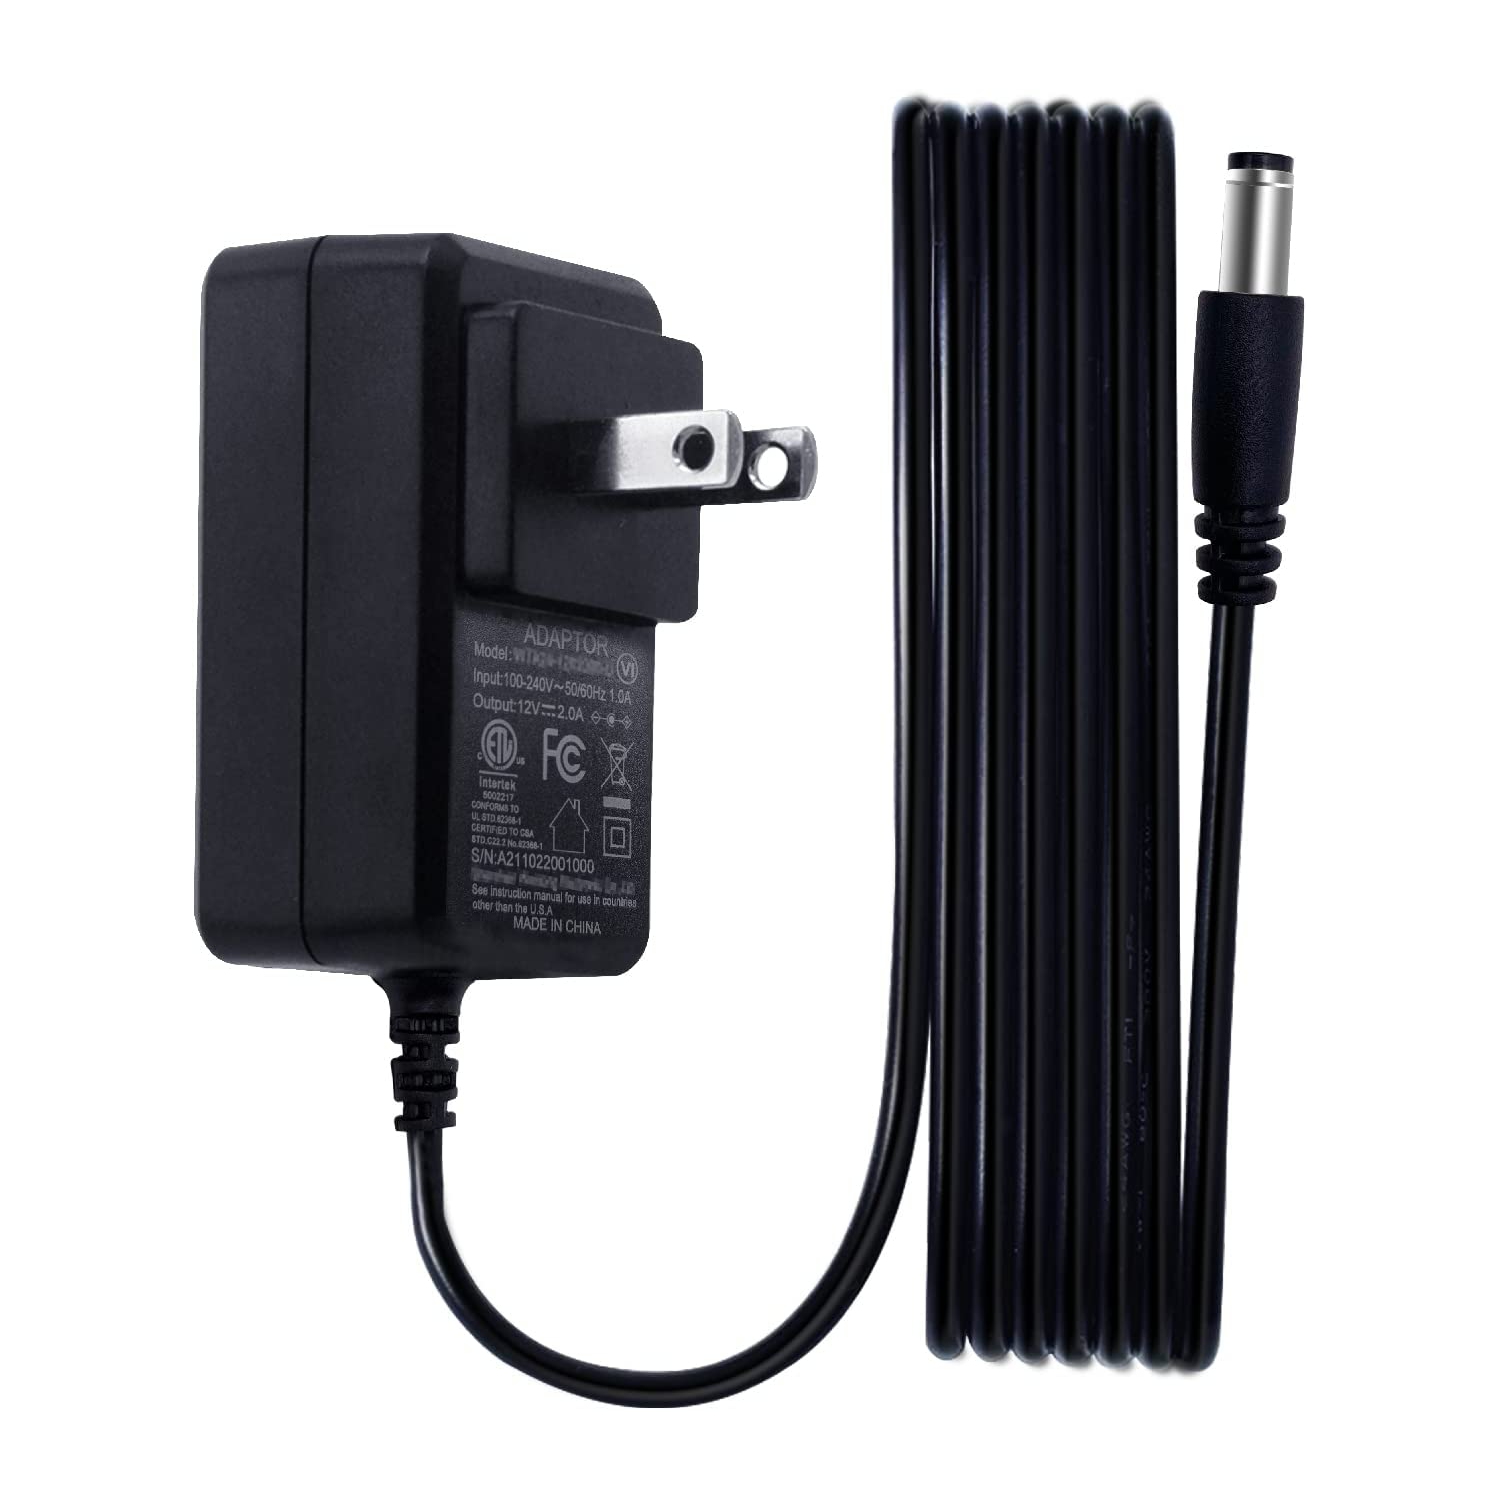 12V 2A/2000mA DC Regulated Power Supply Adapter, 100-240V 50/60Hz AC to DC 24W Adapter for LED Strip Lights, Keyboard,